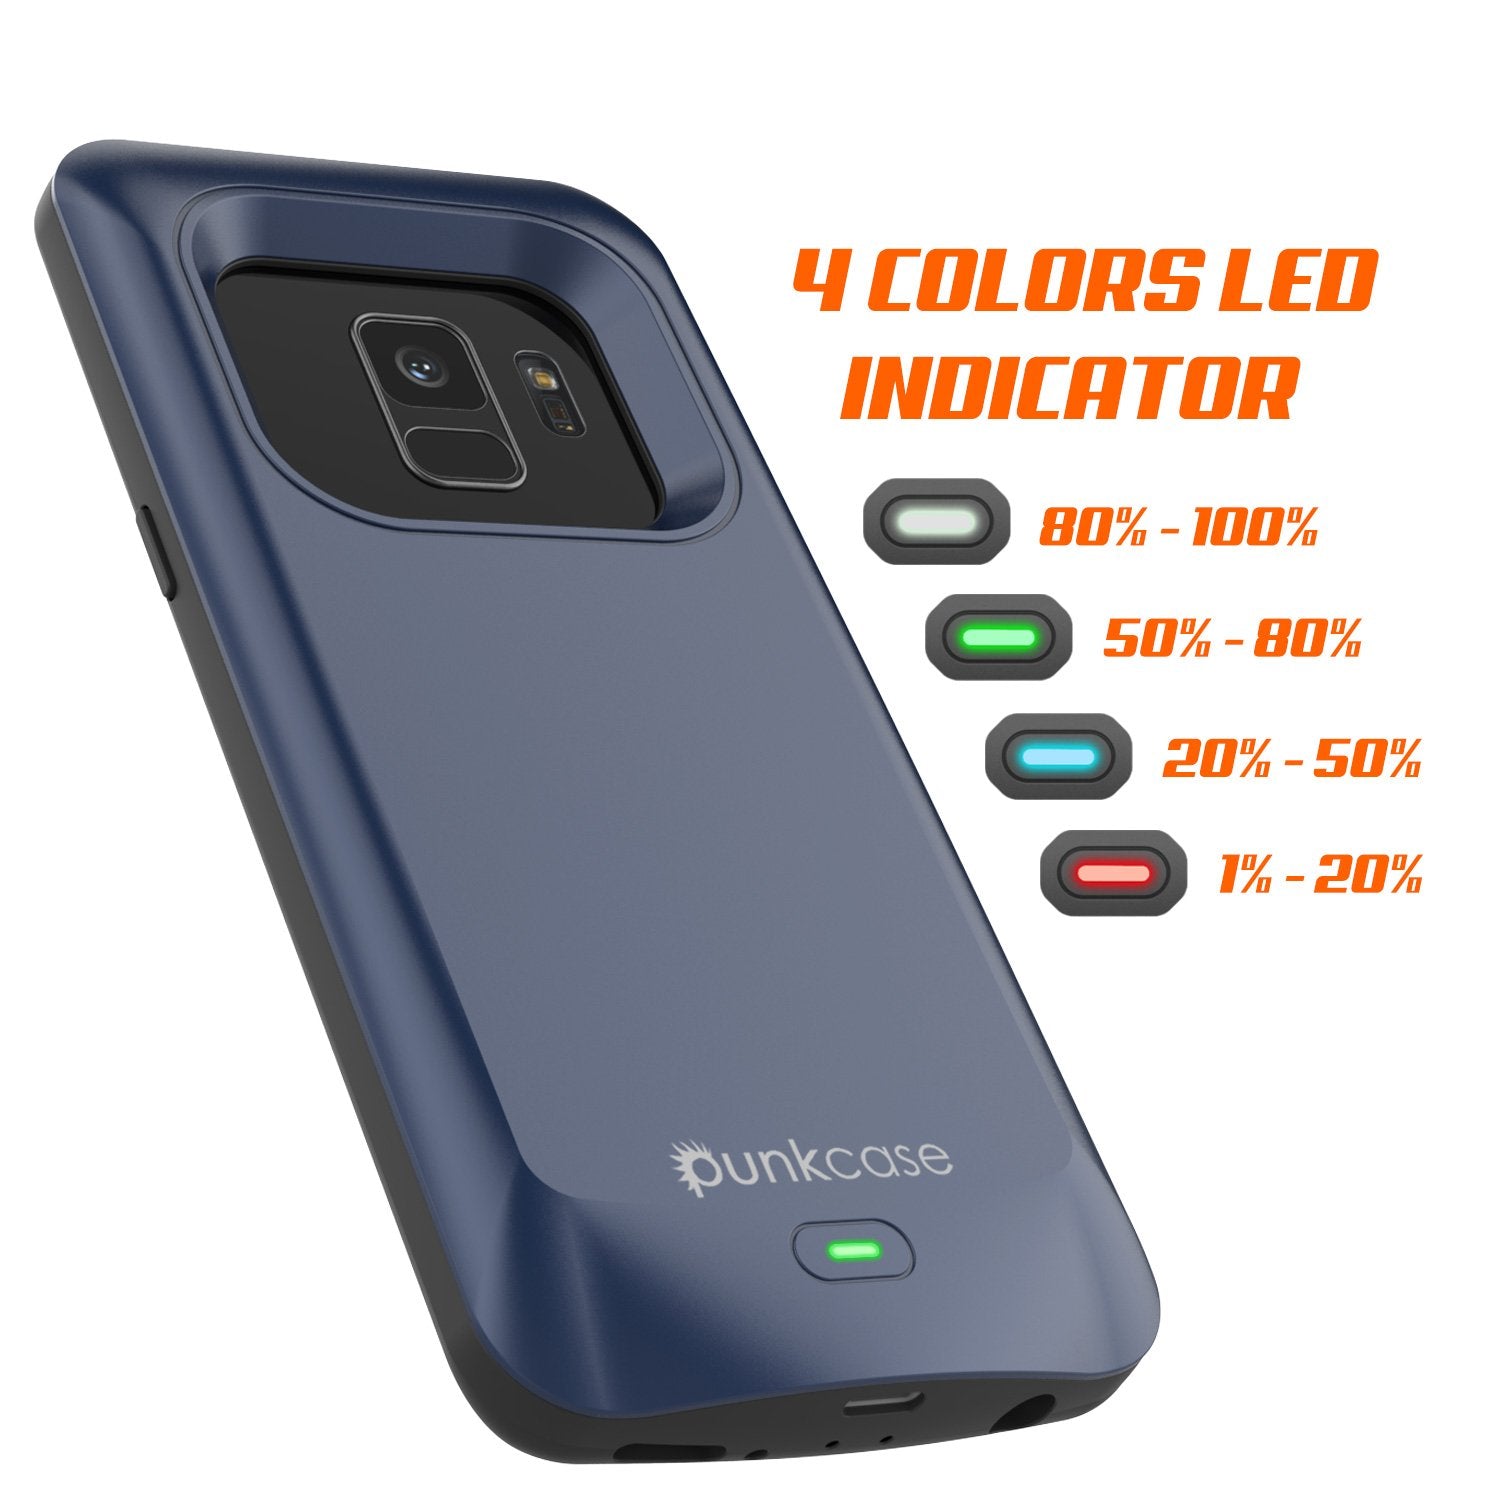 Galaxy S9 Battery Case, PunkJuice 5000mAH Fast Charging Power Bank W/ Screen Protector | Integrated USB Port | IntelSwitch | Slim, Secure and Reliable | Suitable for Samsung Galaxy S9 [Navy]